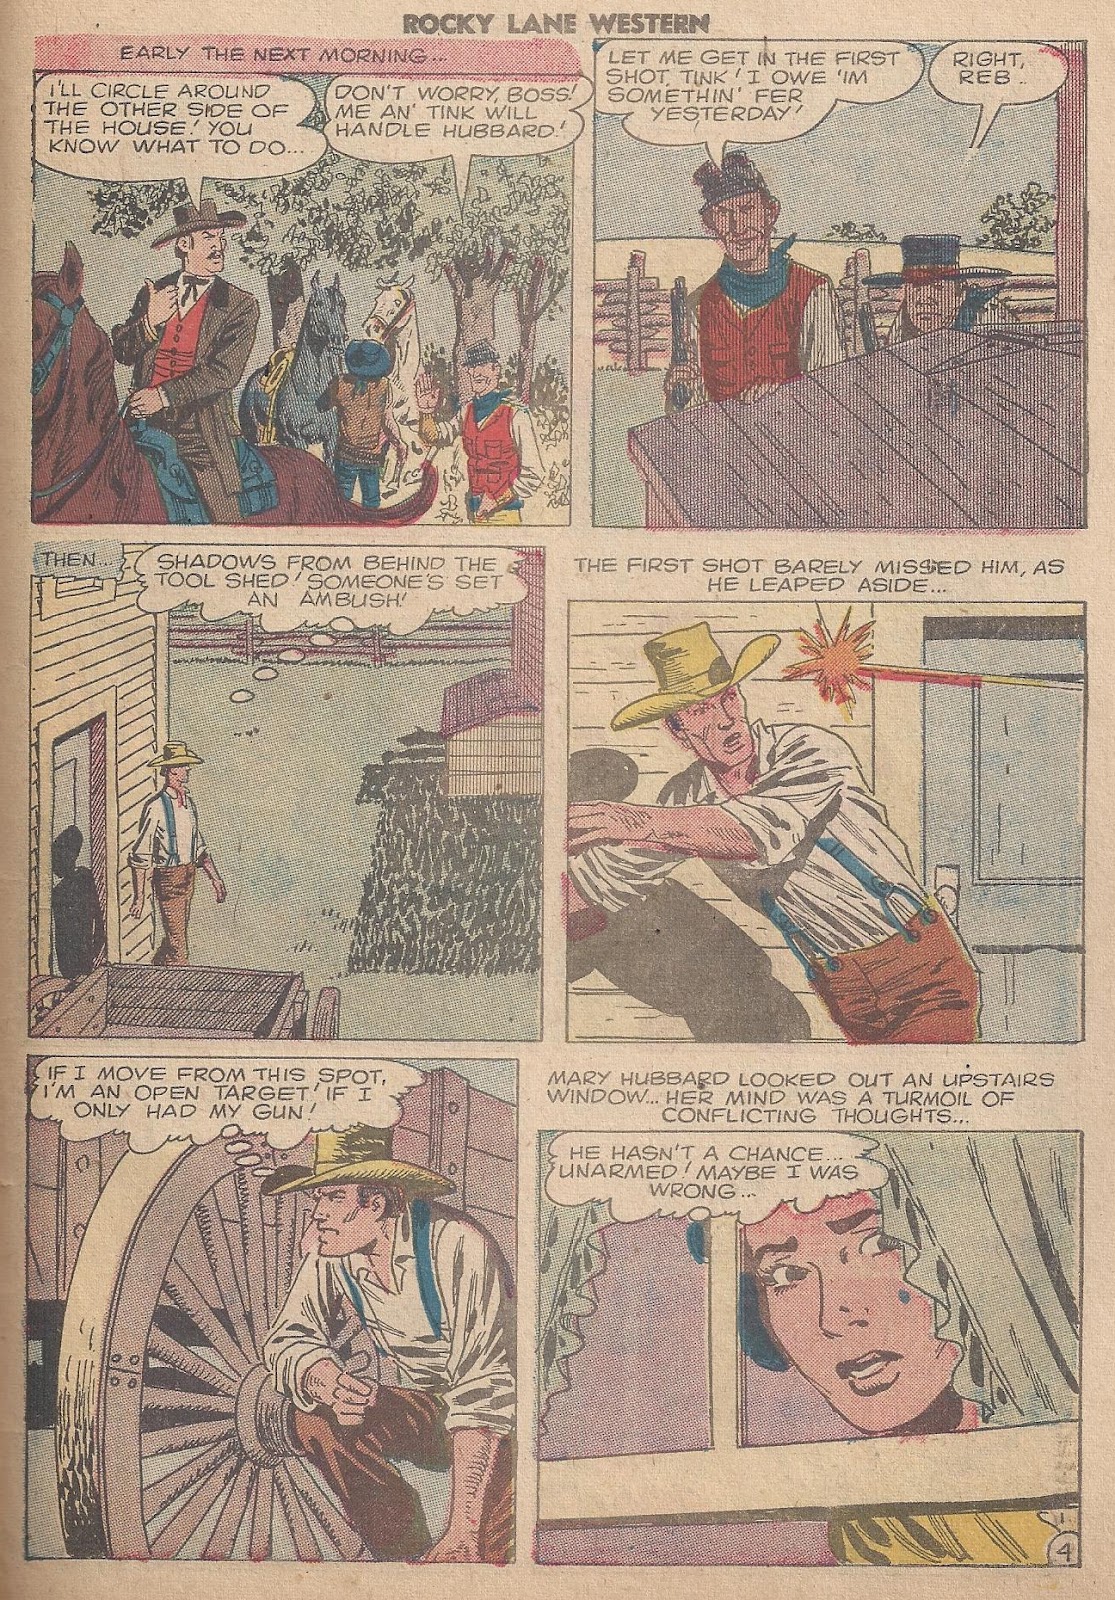 Rocky Lane Western (1954) issue 80 - Page 31